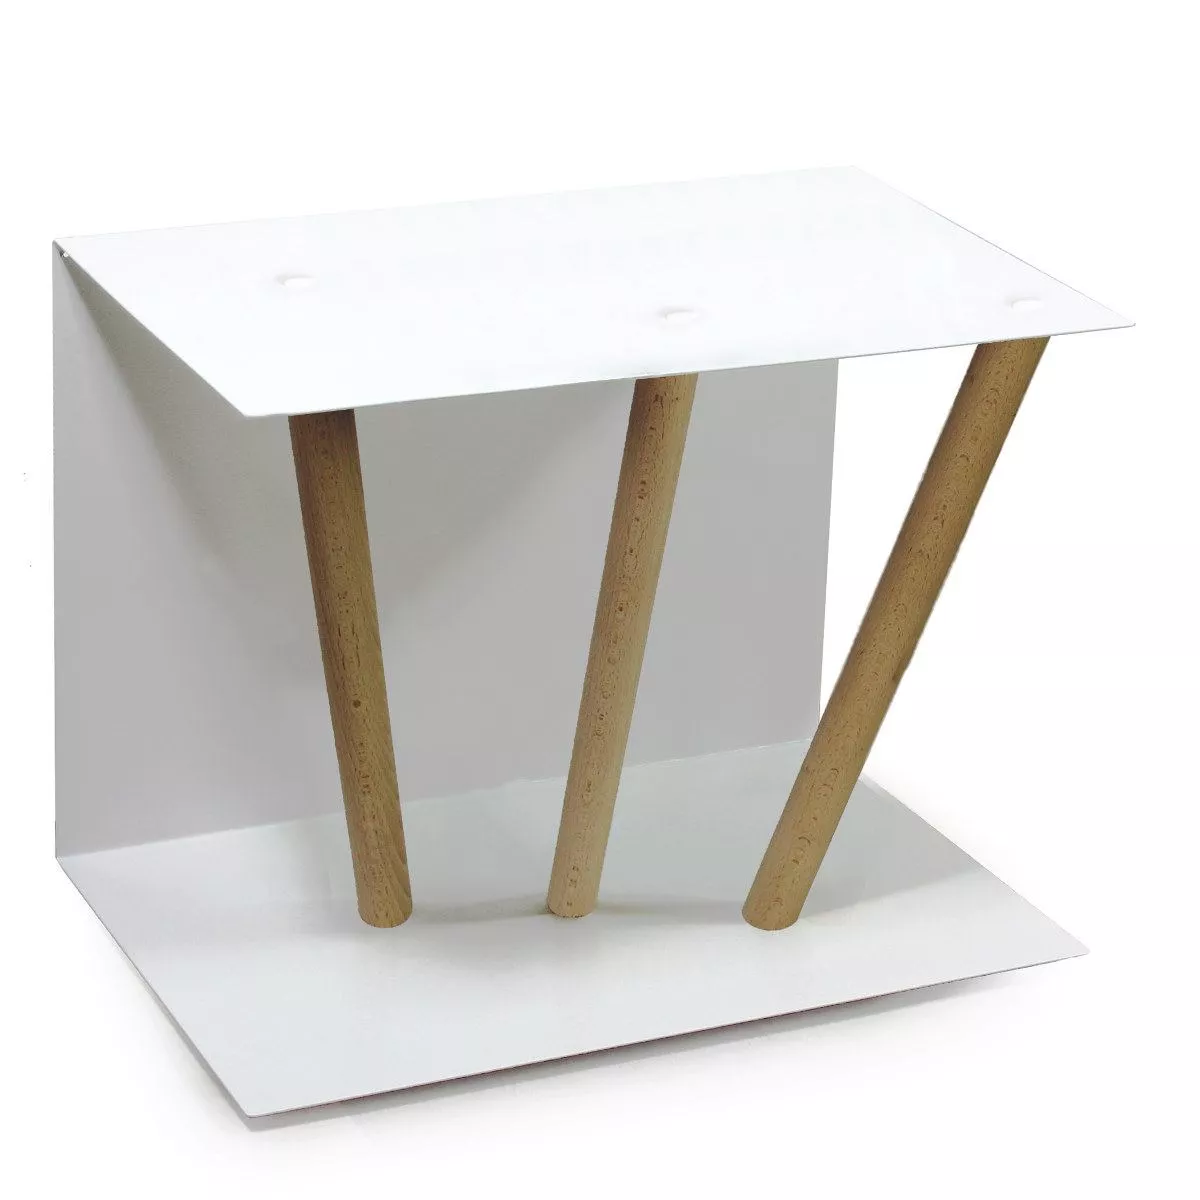 Stainless Steel Sidetable with three oblique legs (40 x 60 cm)